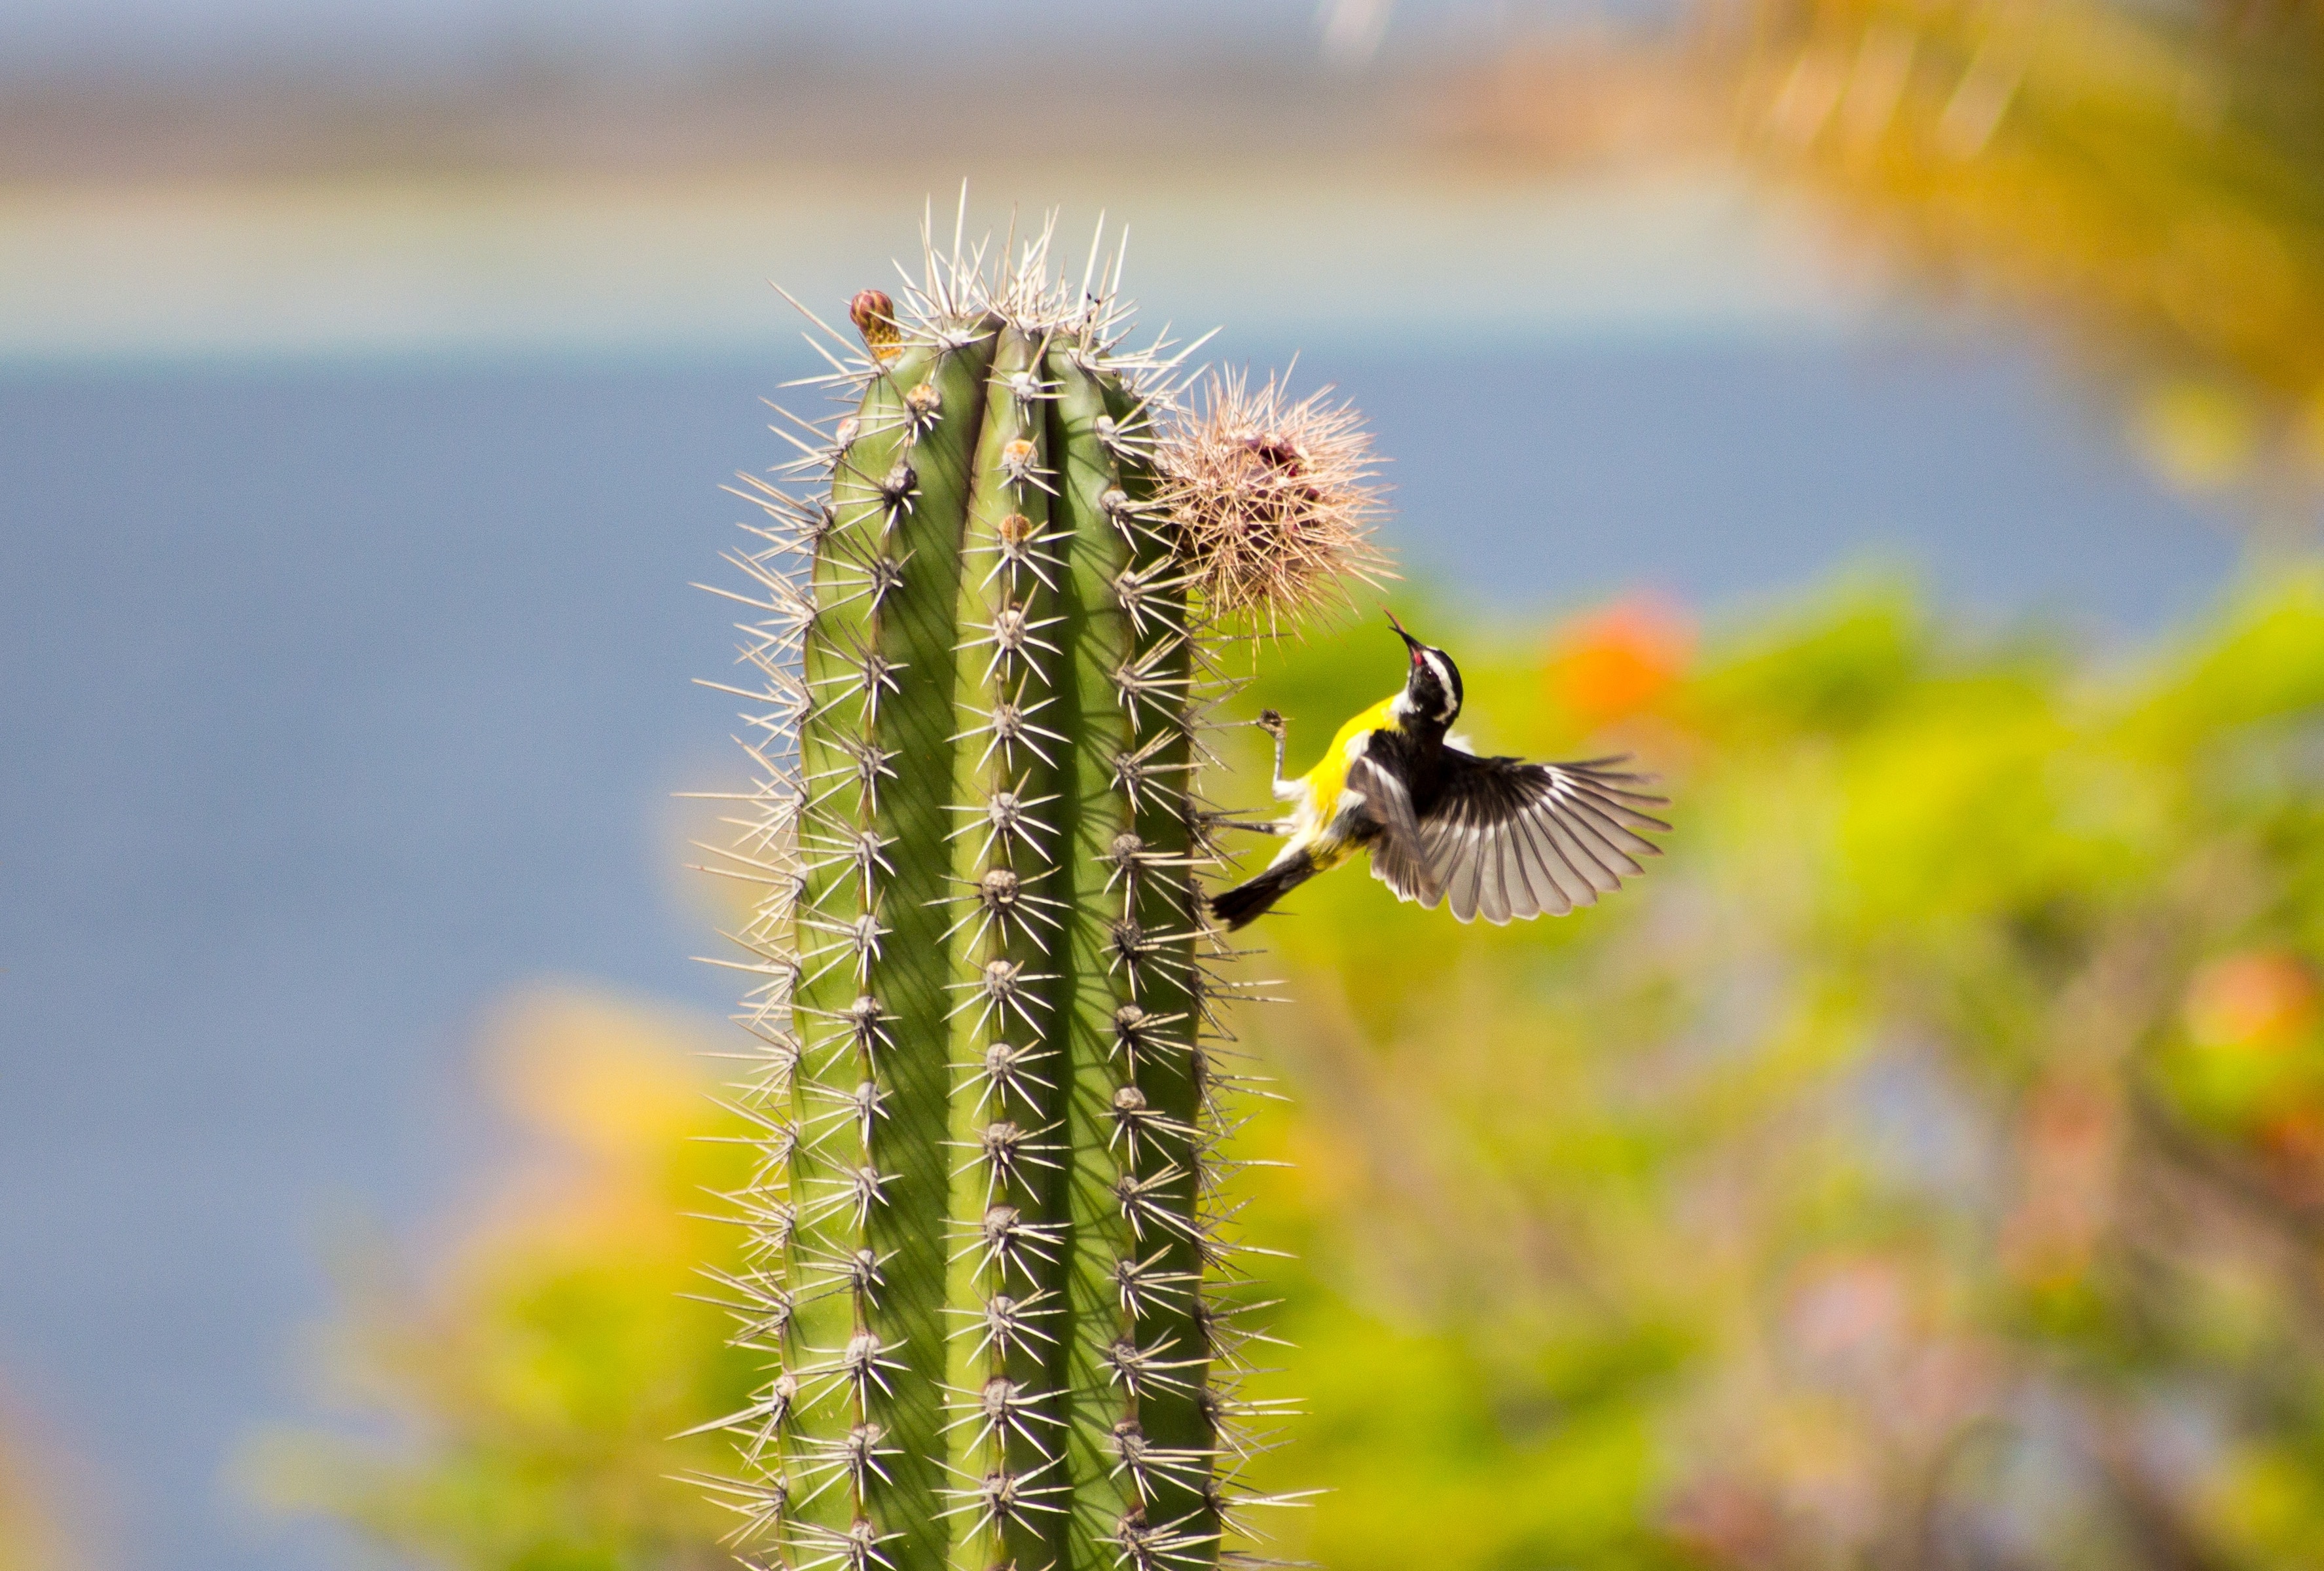 black and yellow hummingbird perched on cactus plant